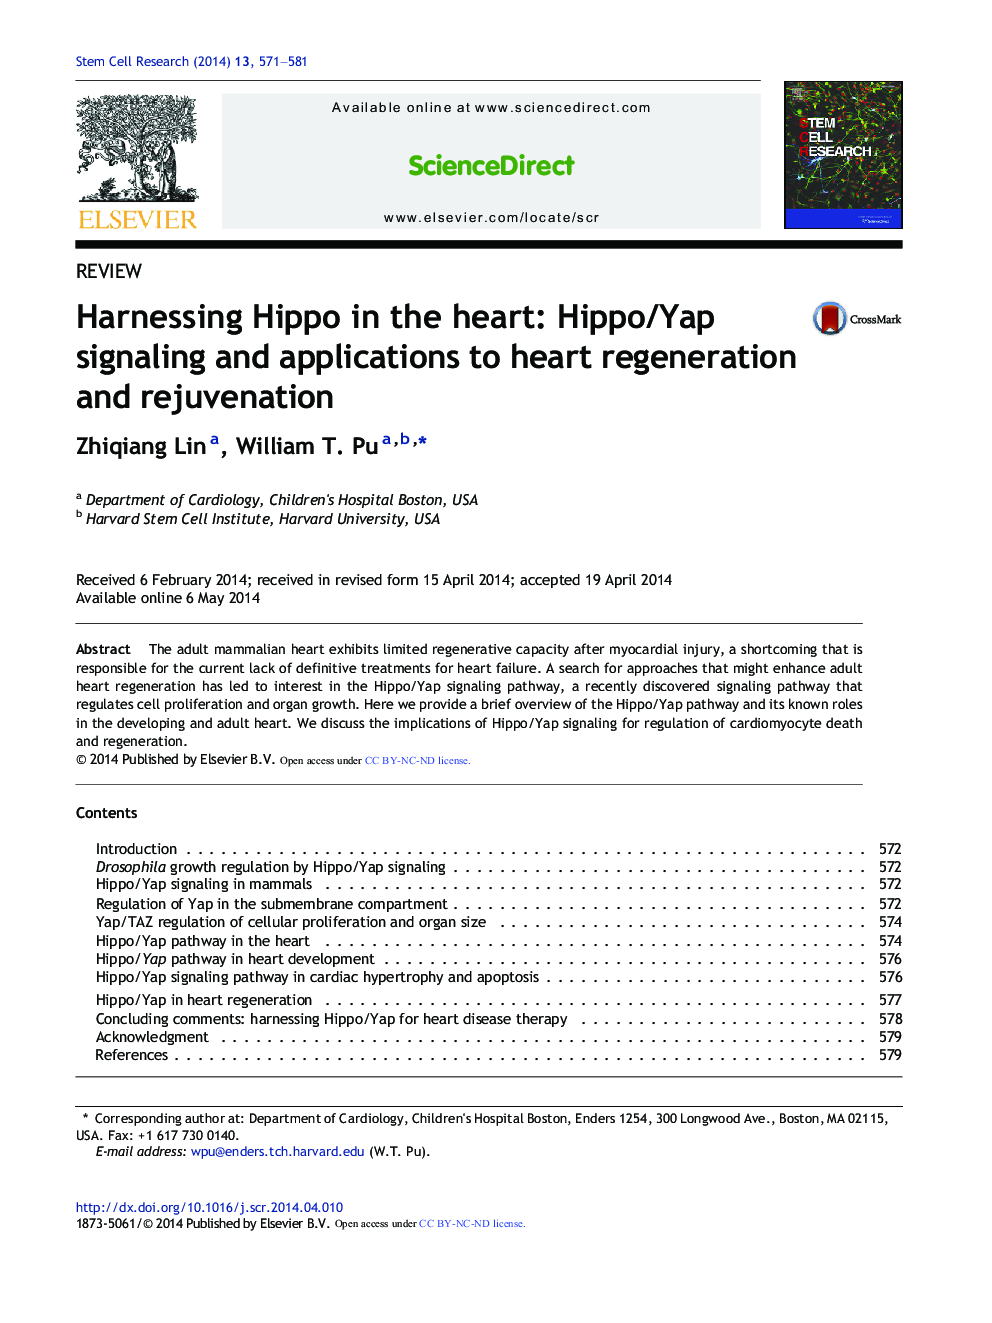 Harnessing Hippo in the heart: Hippo/Yap signaling and applications to heart regeneration and rejuvenation